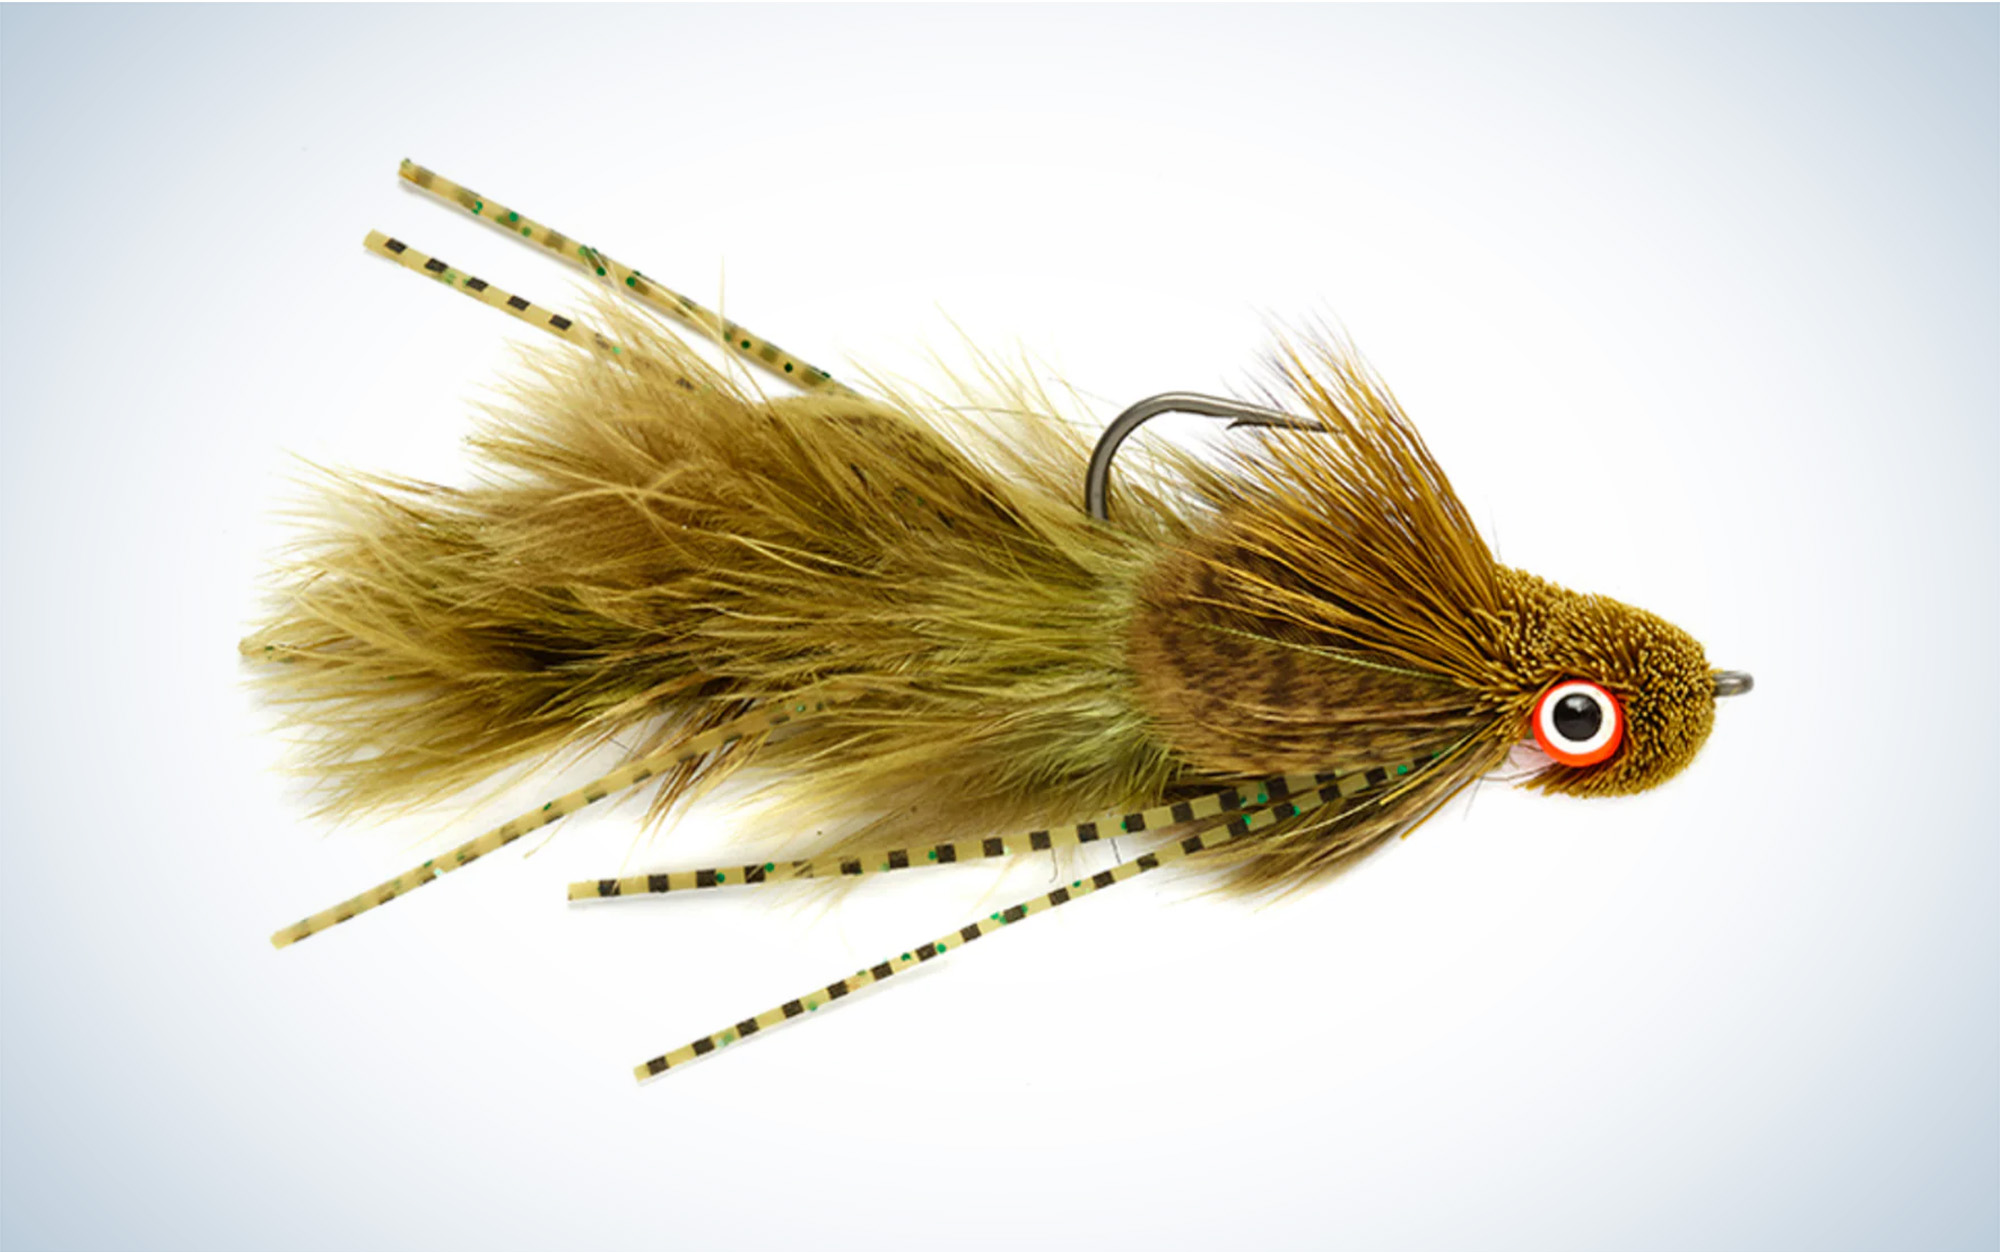 The Bank Robber Sculpin is one of the best bass flies.